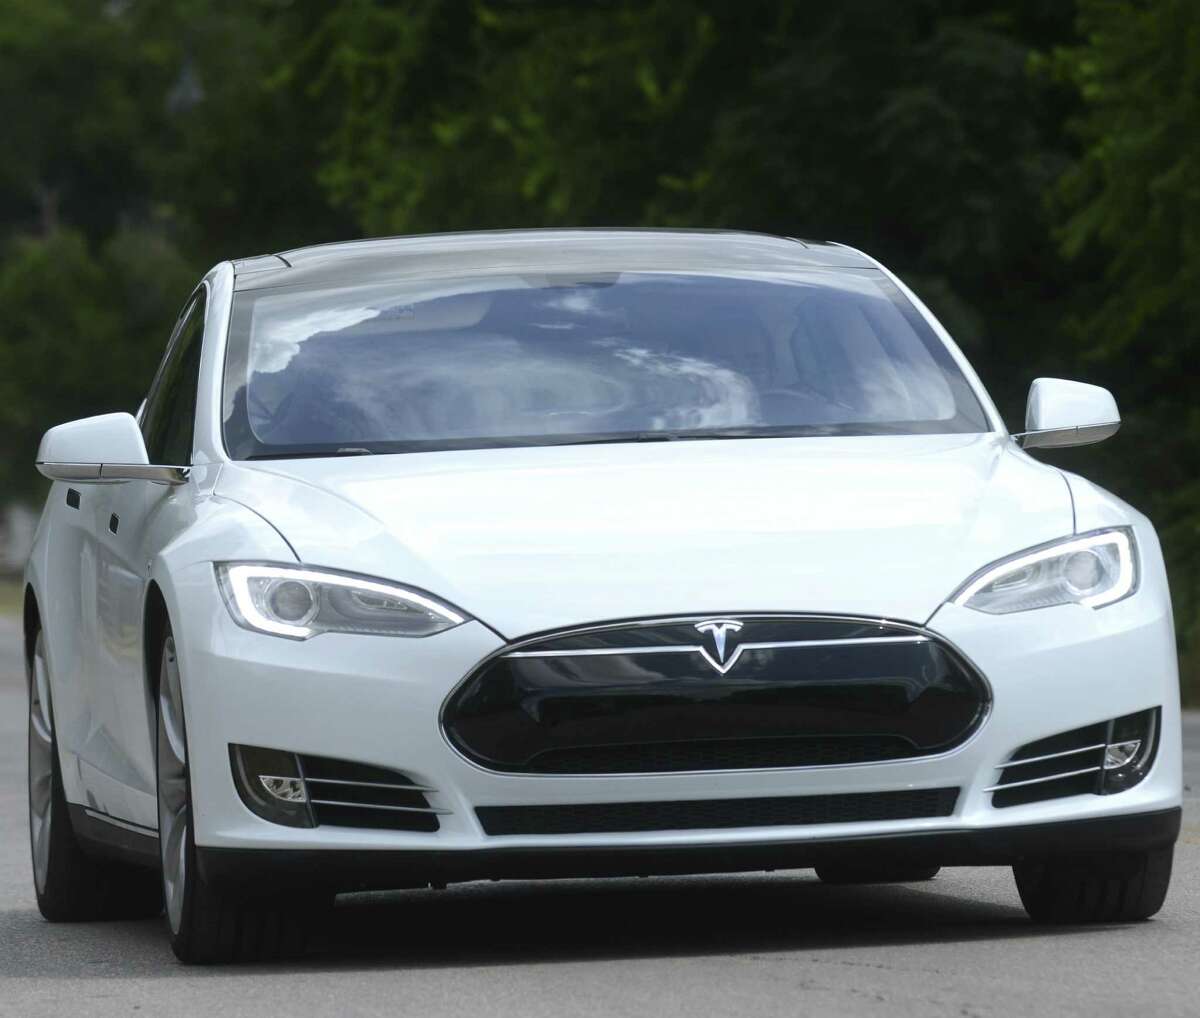 An all-electric Tesla Model S sedan makes its way along Mission Road in San Antonio on Wednesday, Aug. 21, 2013. Express-News business reporter Neal Morton test drove the vehicle.